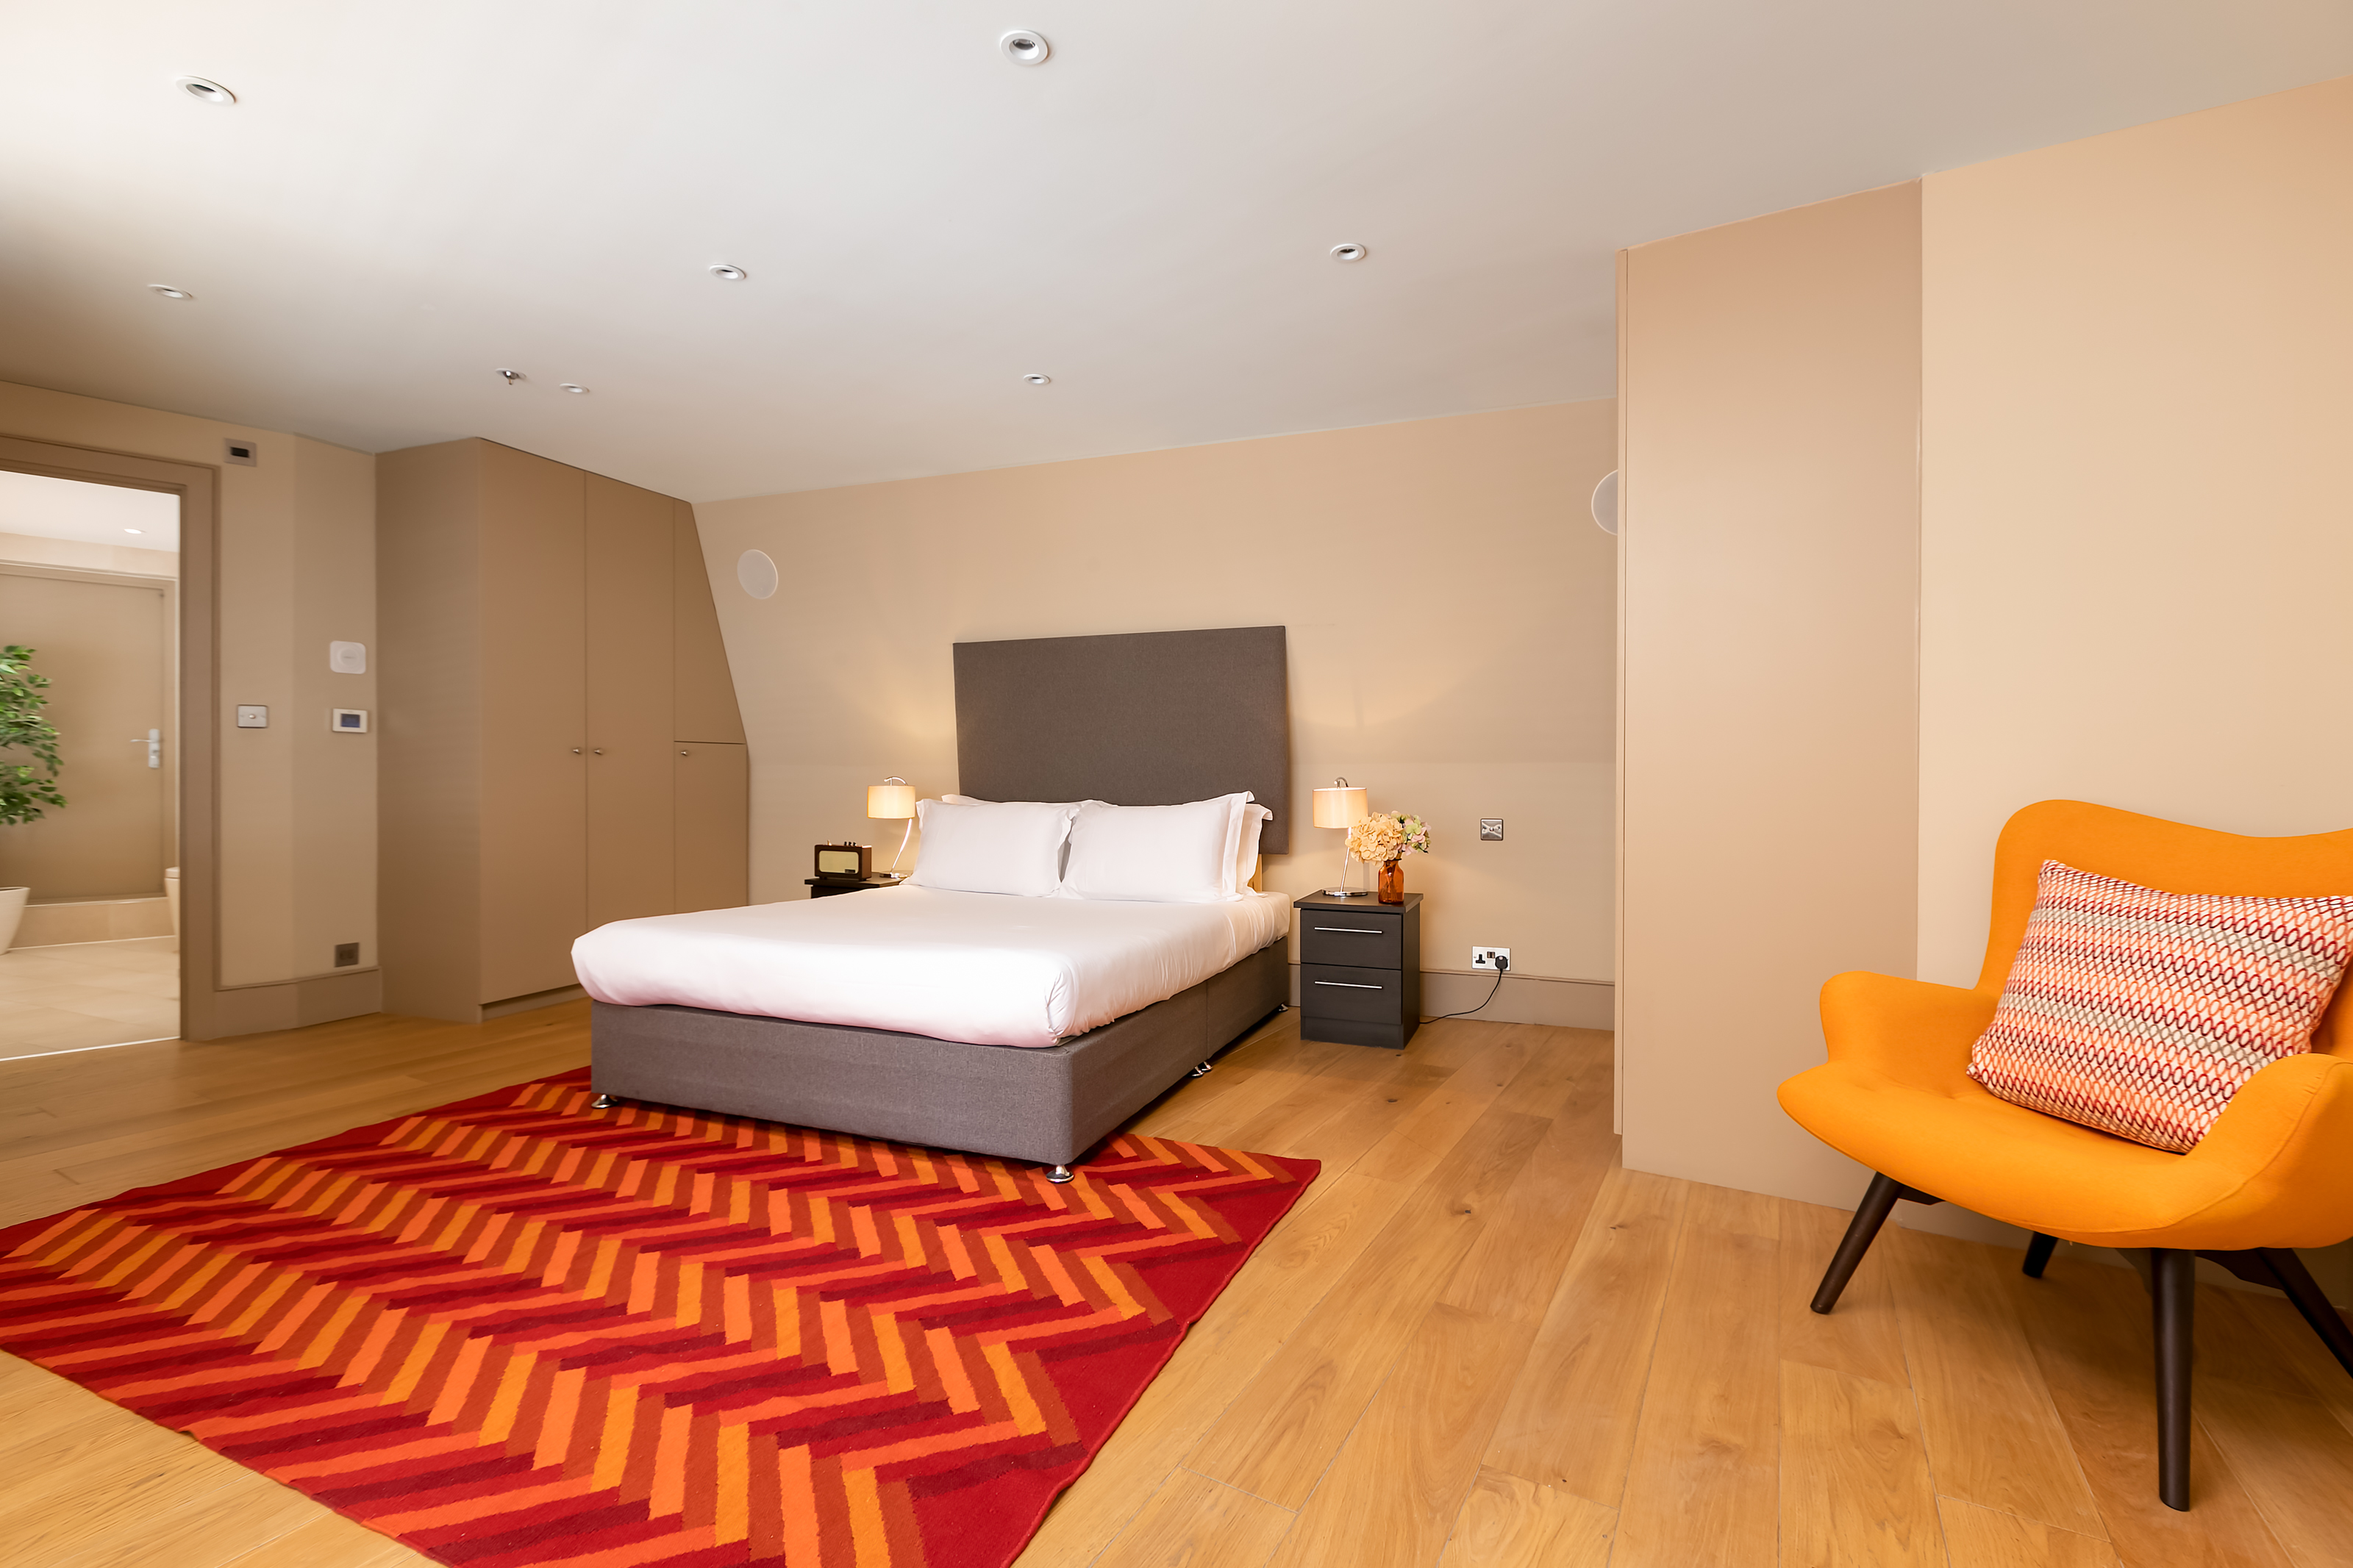 Lovelydays luxury service apartment rental - London - Fitzrovia - Wells Mews A - Lovelysuite - 2 bedrooms - 2 bathrooms - Queen bed - 5 star serviced apartments in london - 3f7746f7e0b9 - Lovelydays